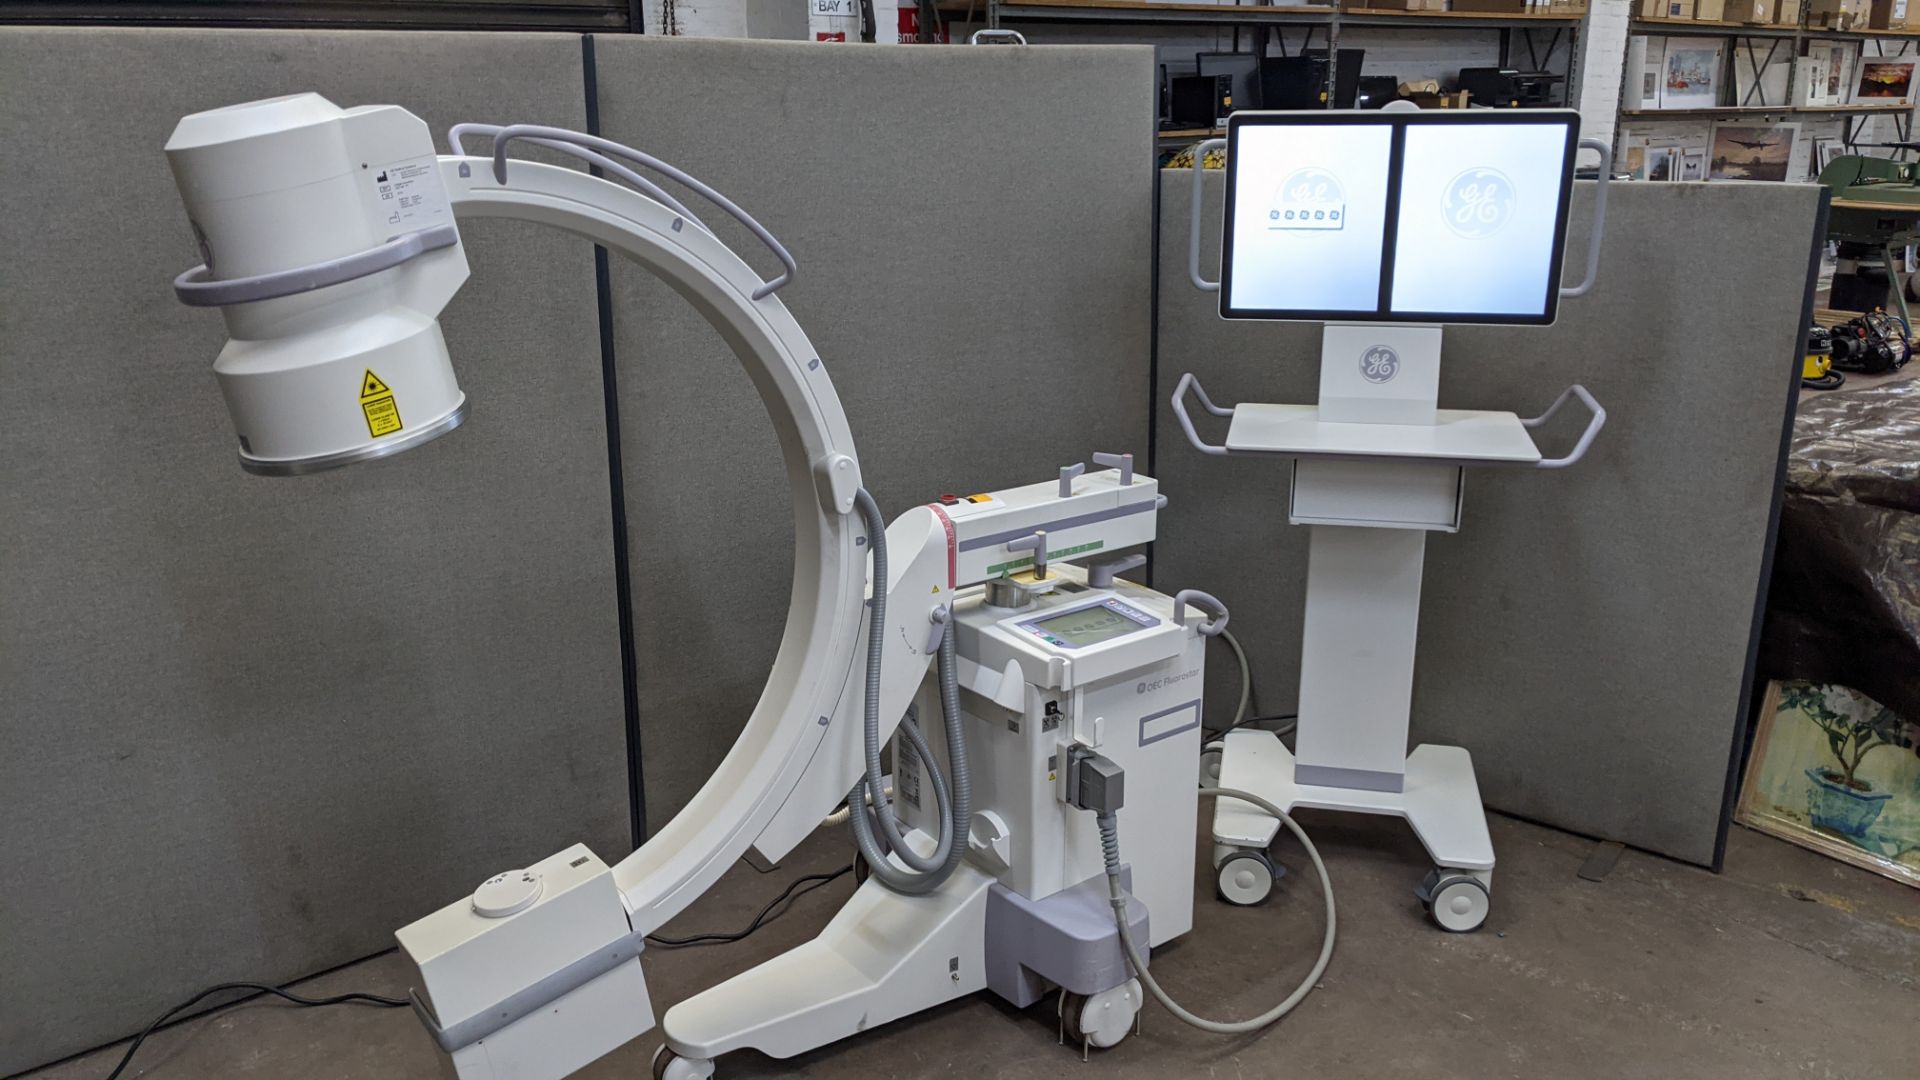 GE-OEC Fluorostar imaging system, purchased new in August 2017. EO4 Series. - Image 5 of 68